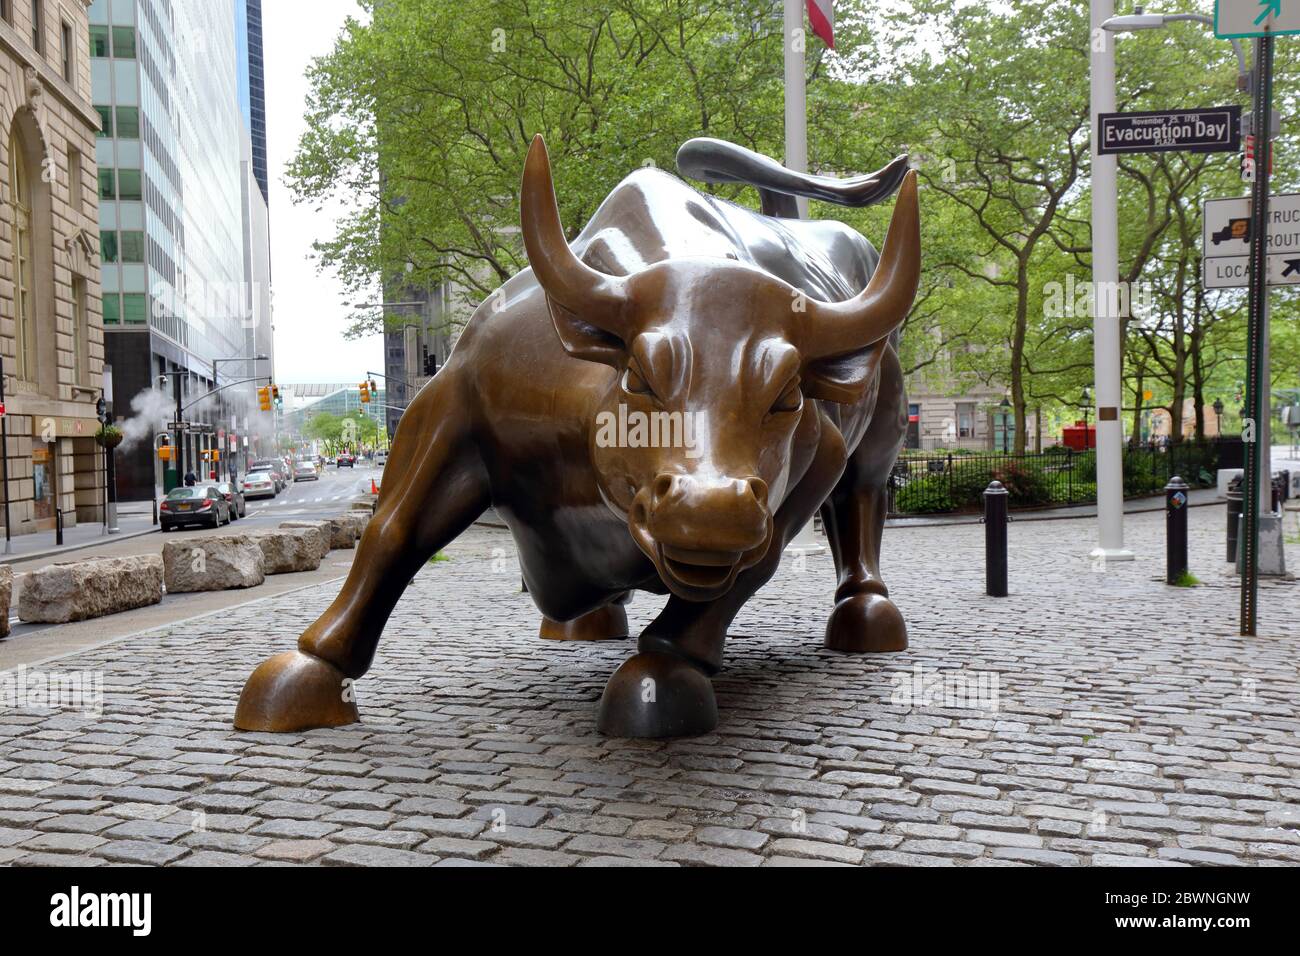 Charging Bull by Arturo Di Modica. A bronze sculpture that has come to represent Wall Street, located at Bowling Green, Manhattan, New York. no people Stock Photo